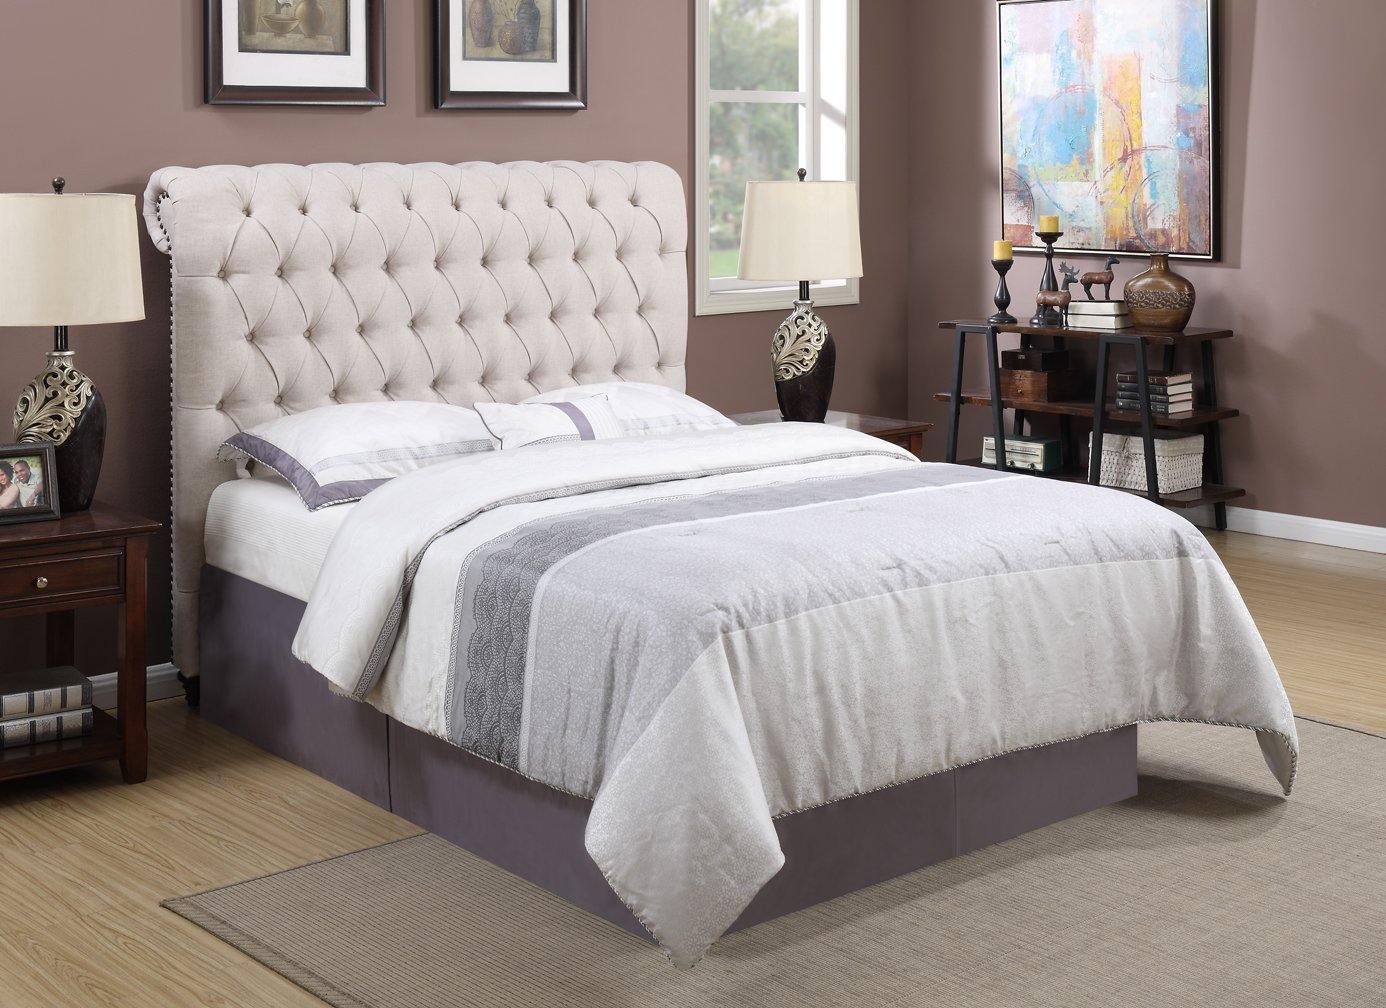 Devon upholstered bed 300525 Beige Traditional queen bed By coaster - sofafair.com